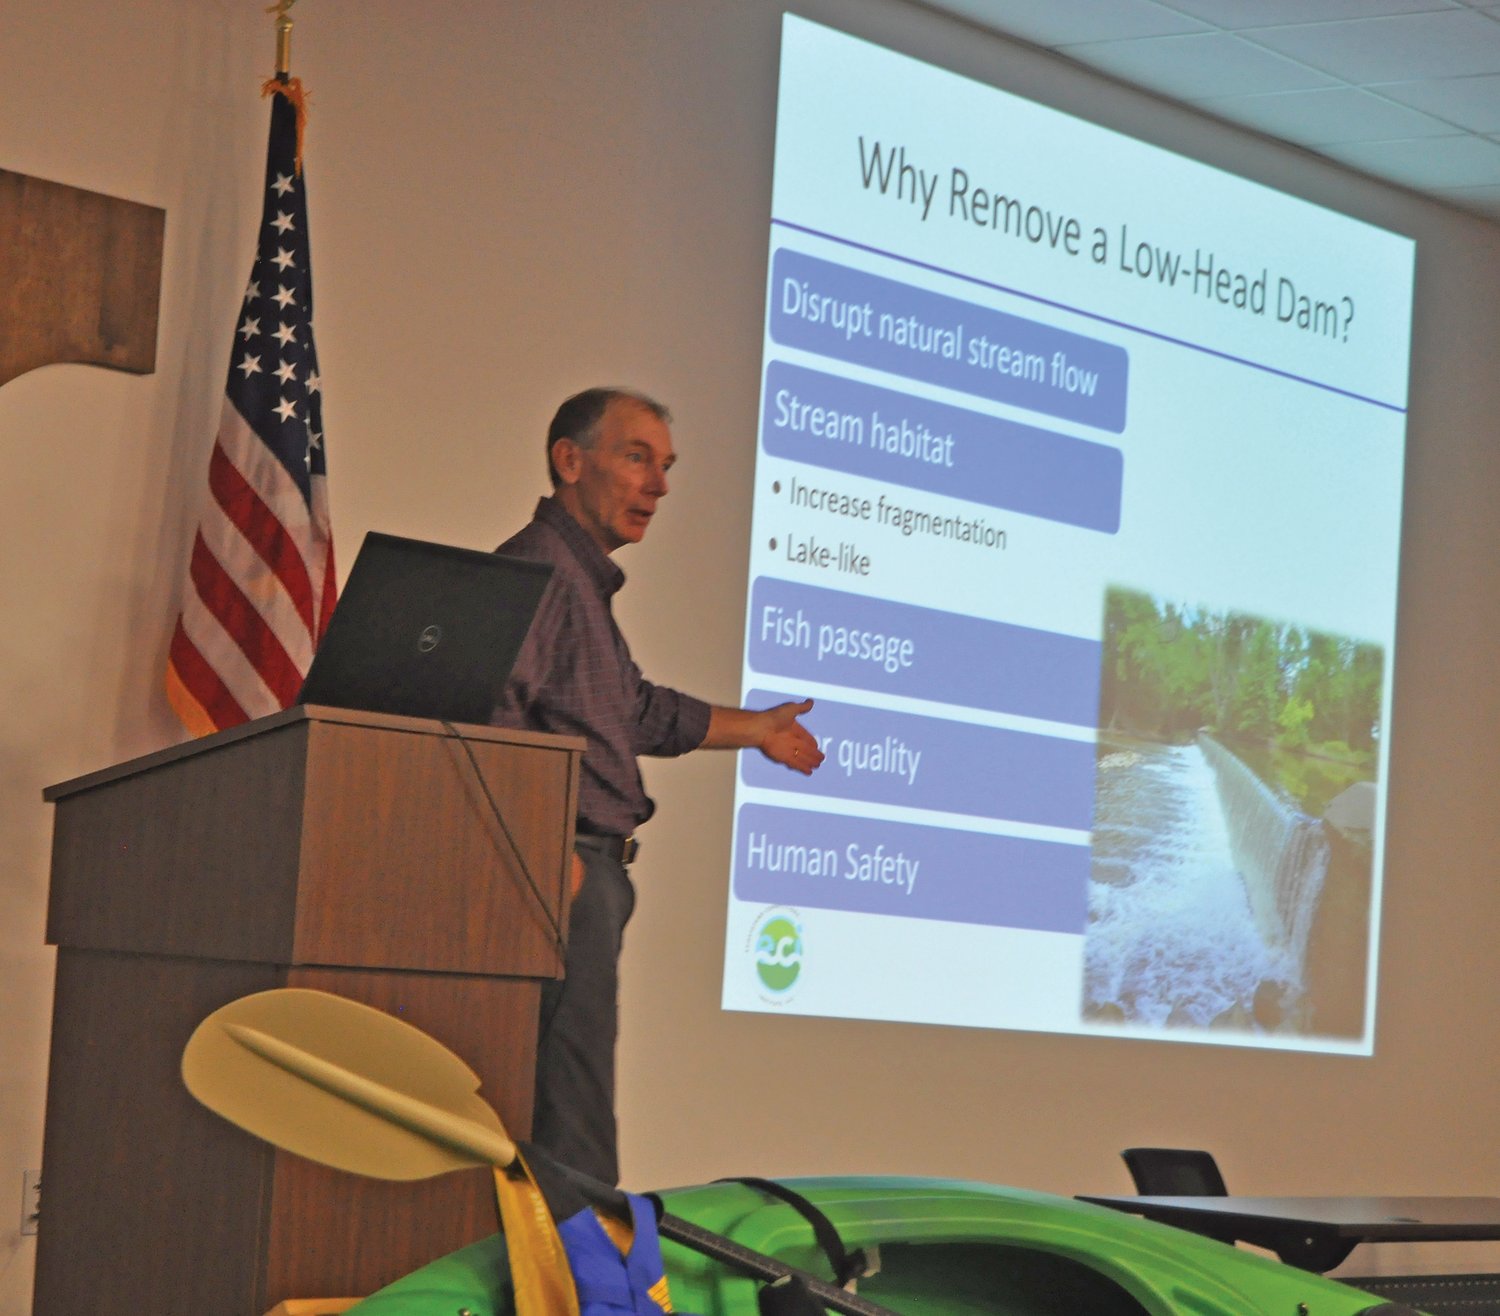 Dr. Jerry Sweeten, senior ecologist for Ecosystems Connections Institute, speaks about the Sugar Creek lowhead dam removal during the Friends of Sugar Creek annual meeting at the Hoosier Heartland State Bank Success Center on Thursday.